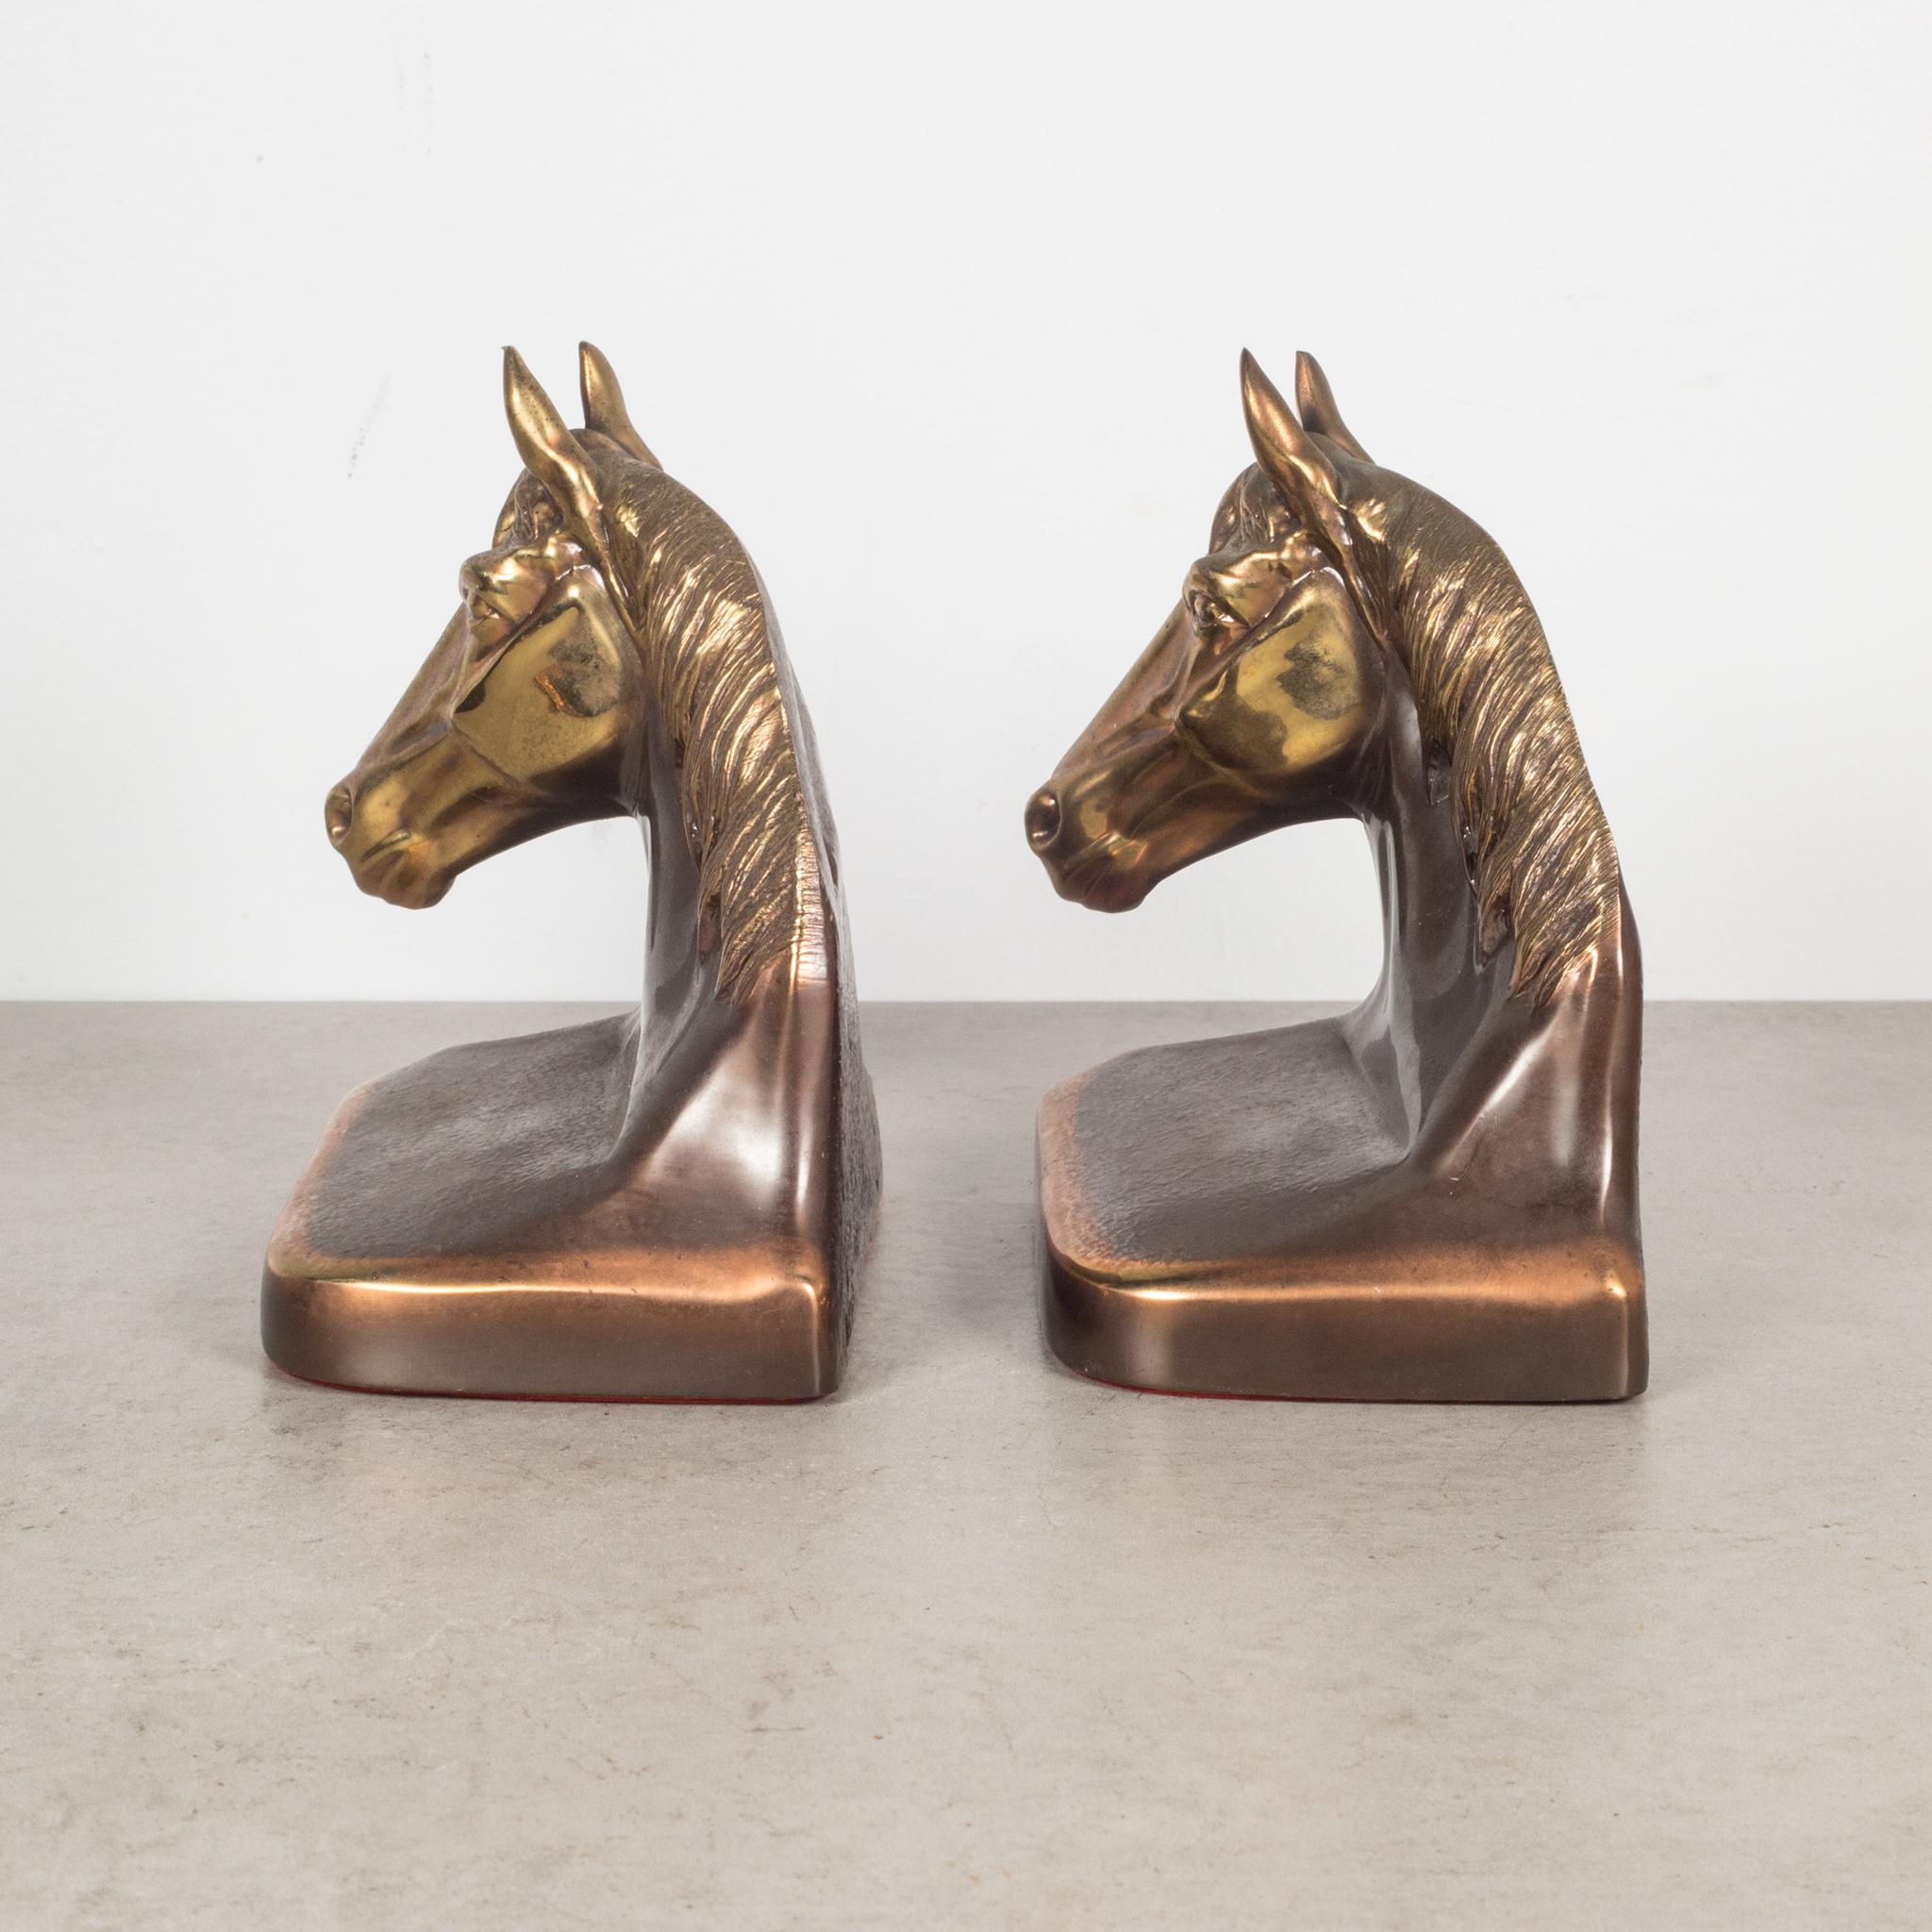 American Bronze and Copper Plated Horse Head Bookends c.1940